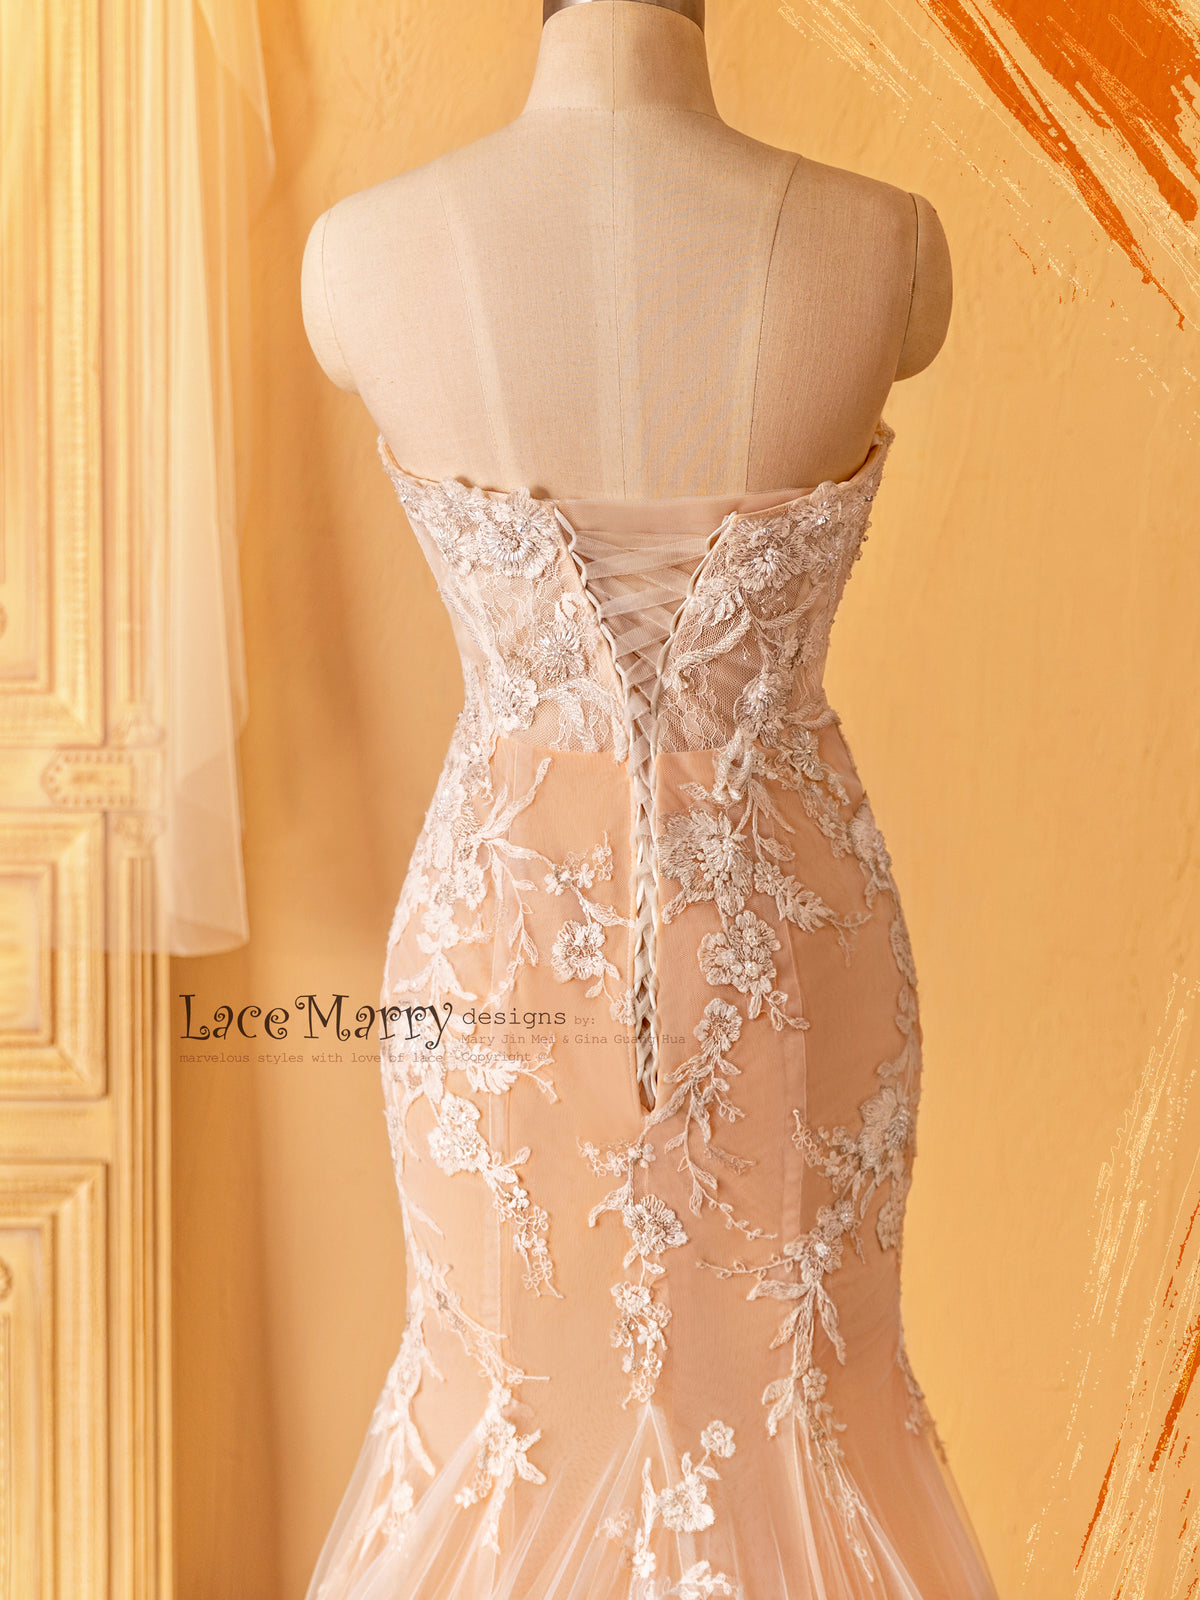 Lace up Wedding Dress with Nude Underlay